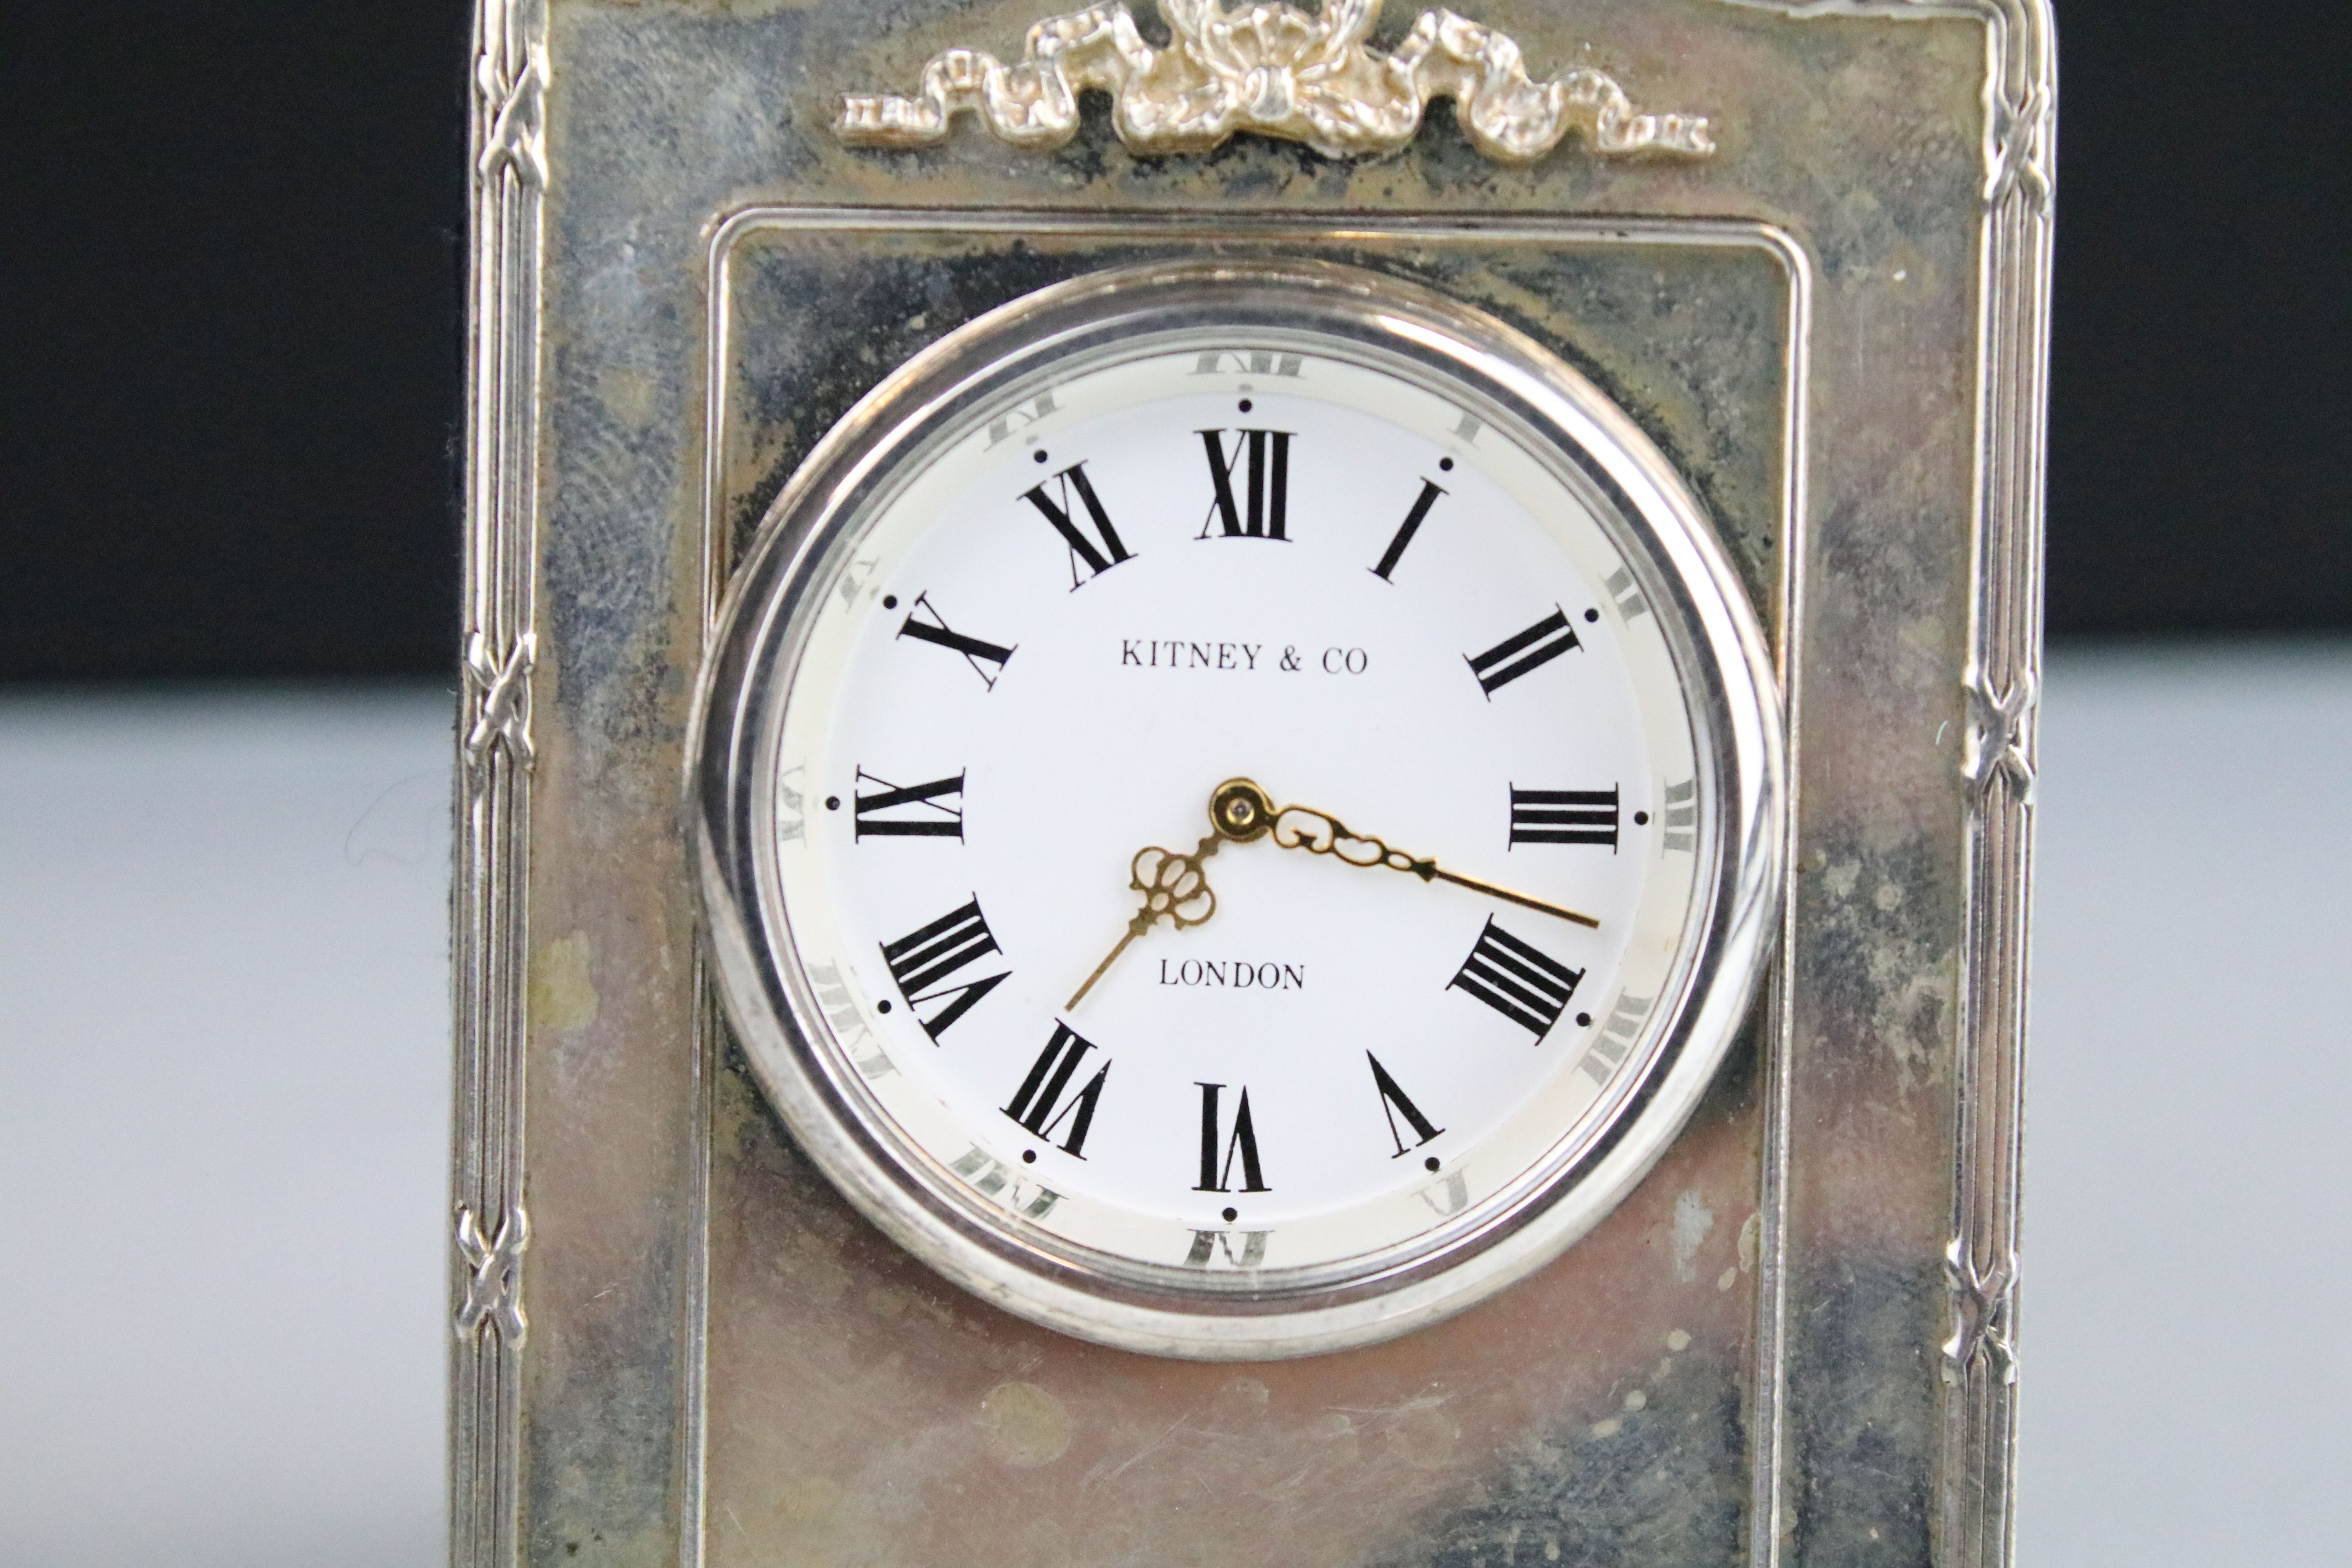 Kitney & Co silver fronted easel back clock timepiece having a round face with roman numerals to the - Image 2 of 3